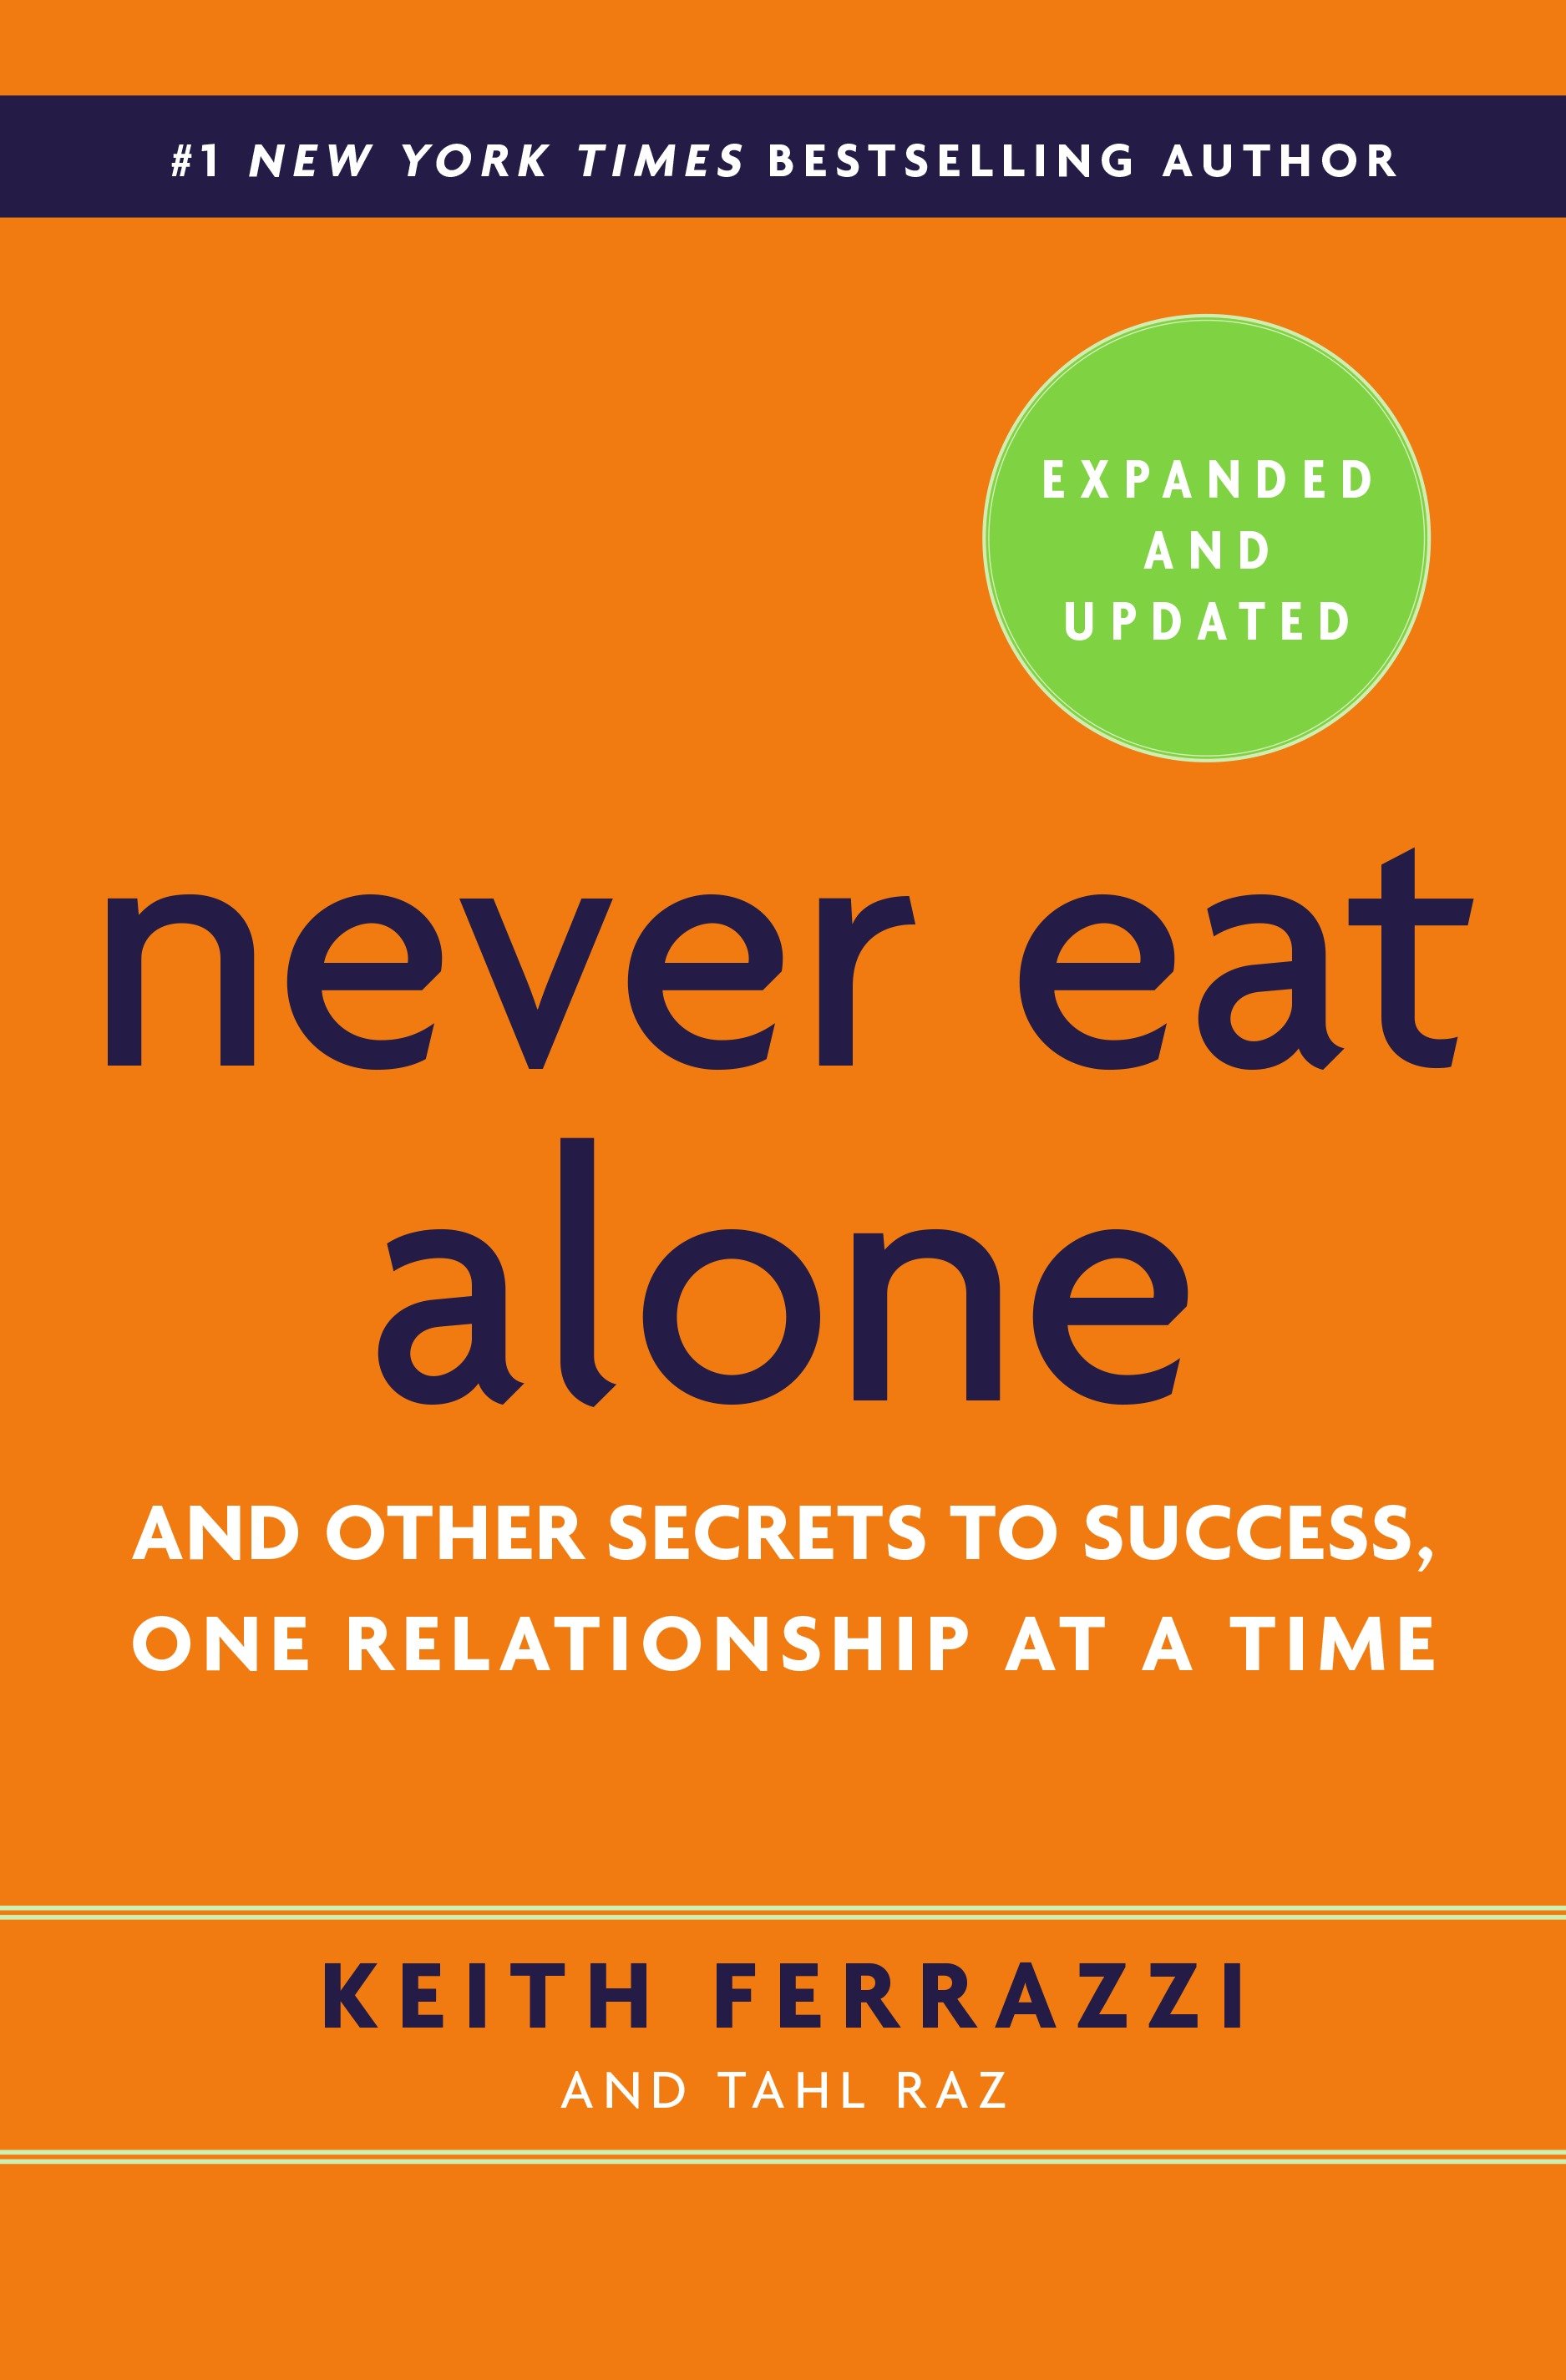 Never eat alone, expanded and updated and other secrets to success, one relationship at a time cover image